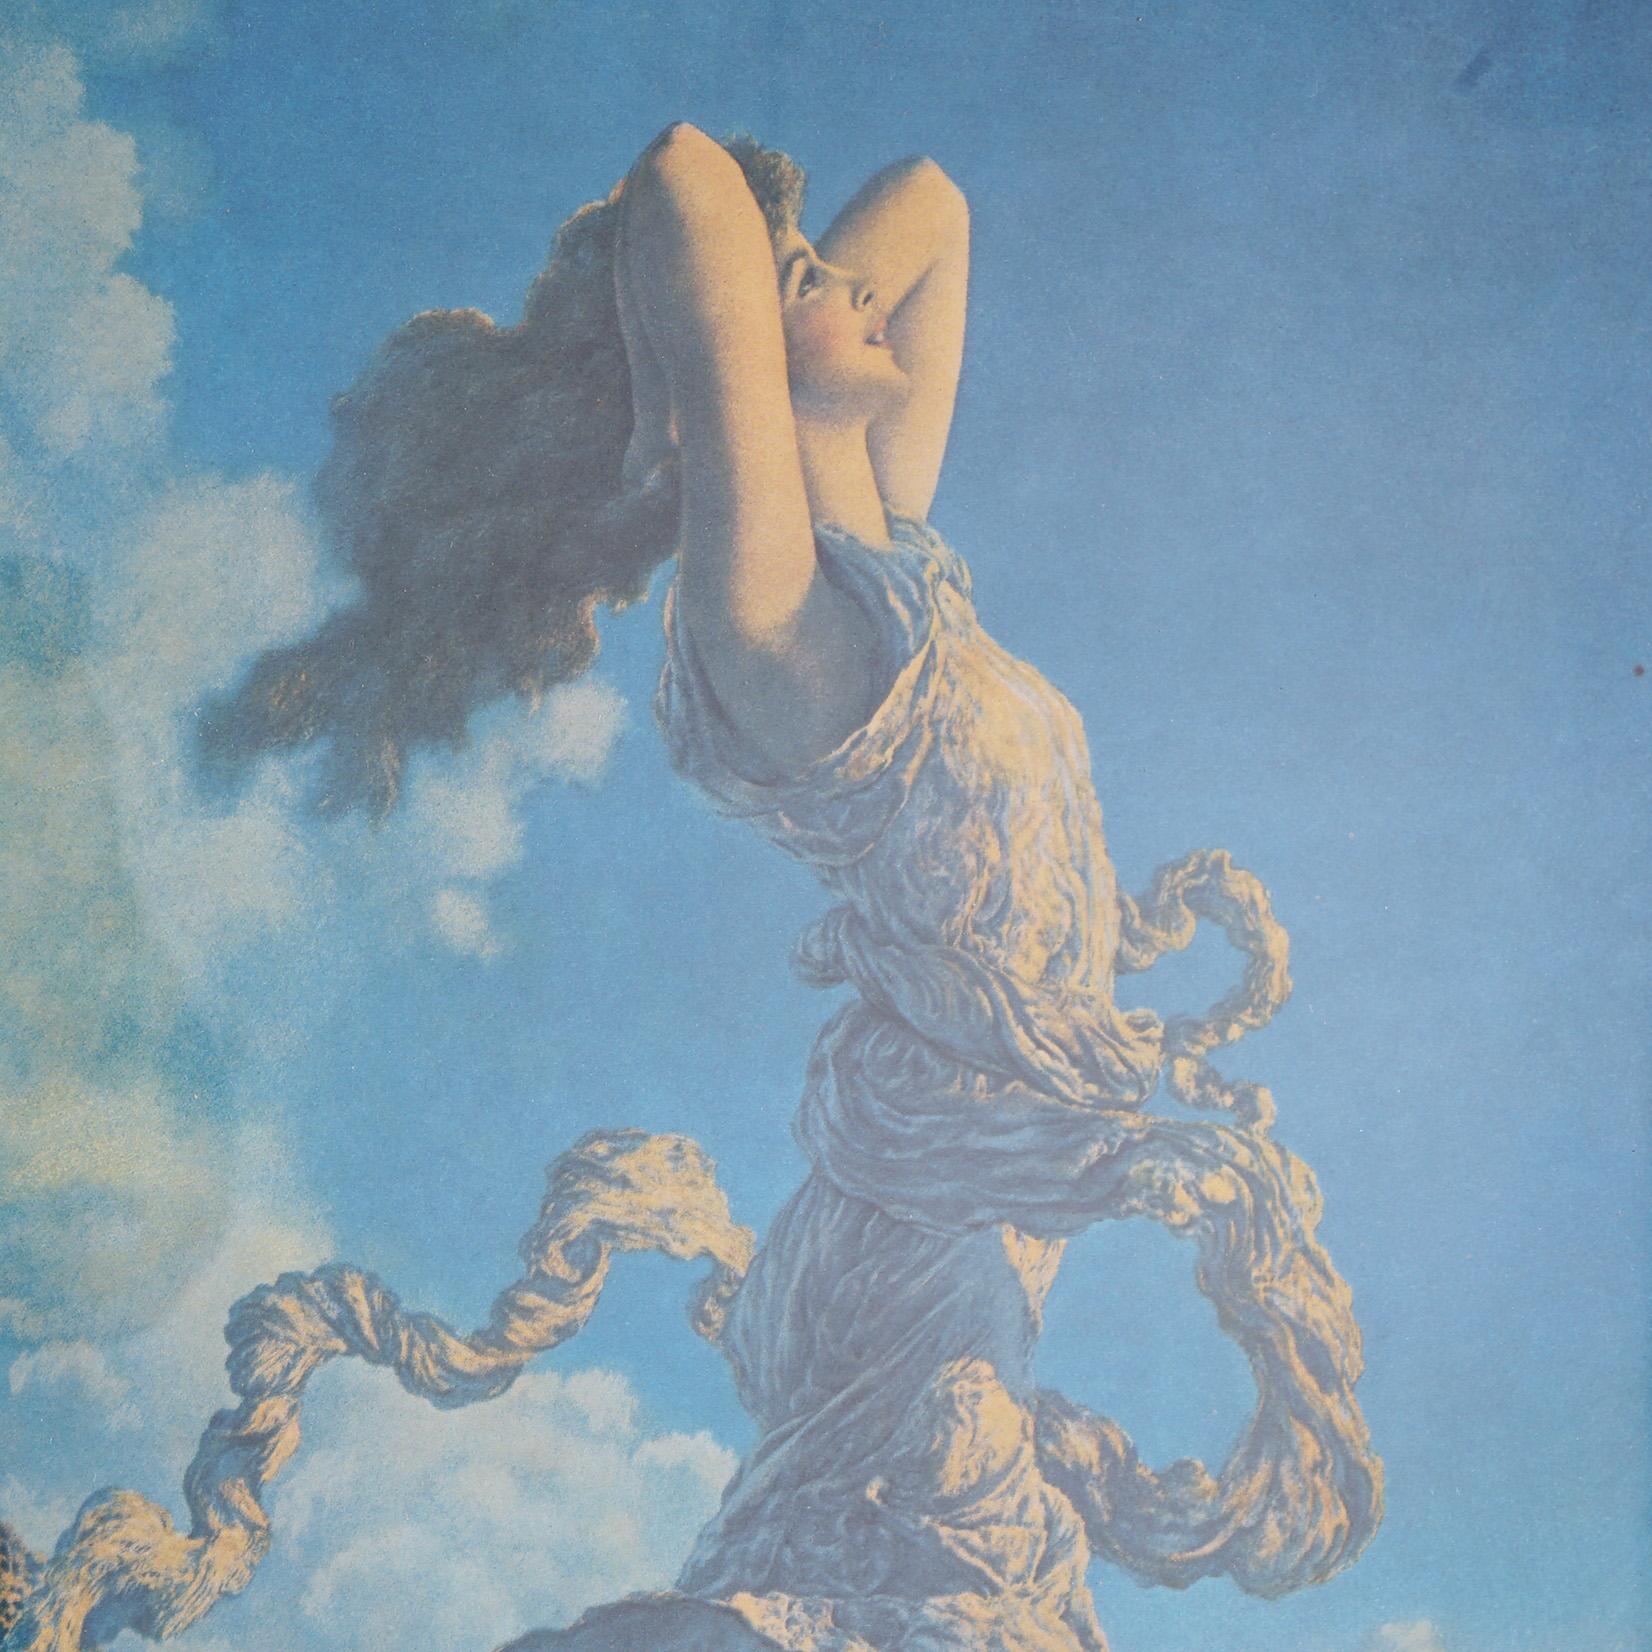 Paper Large Maxfield Parrish Art Deco Print “Ecstasy”, Framed, C1920 For Sale